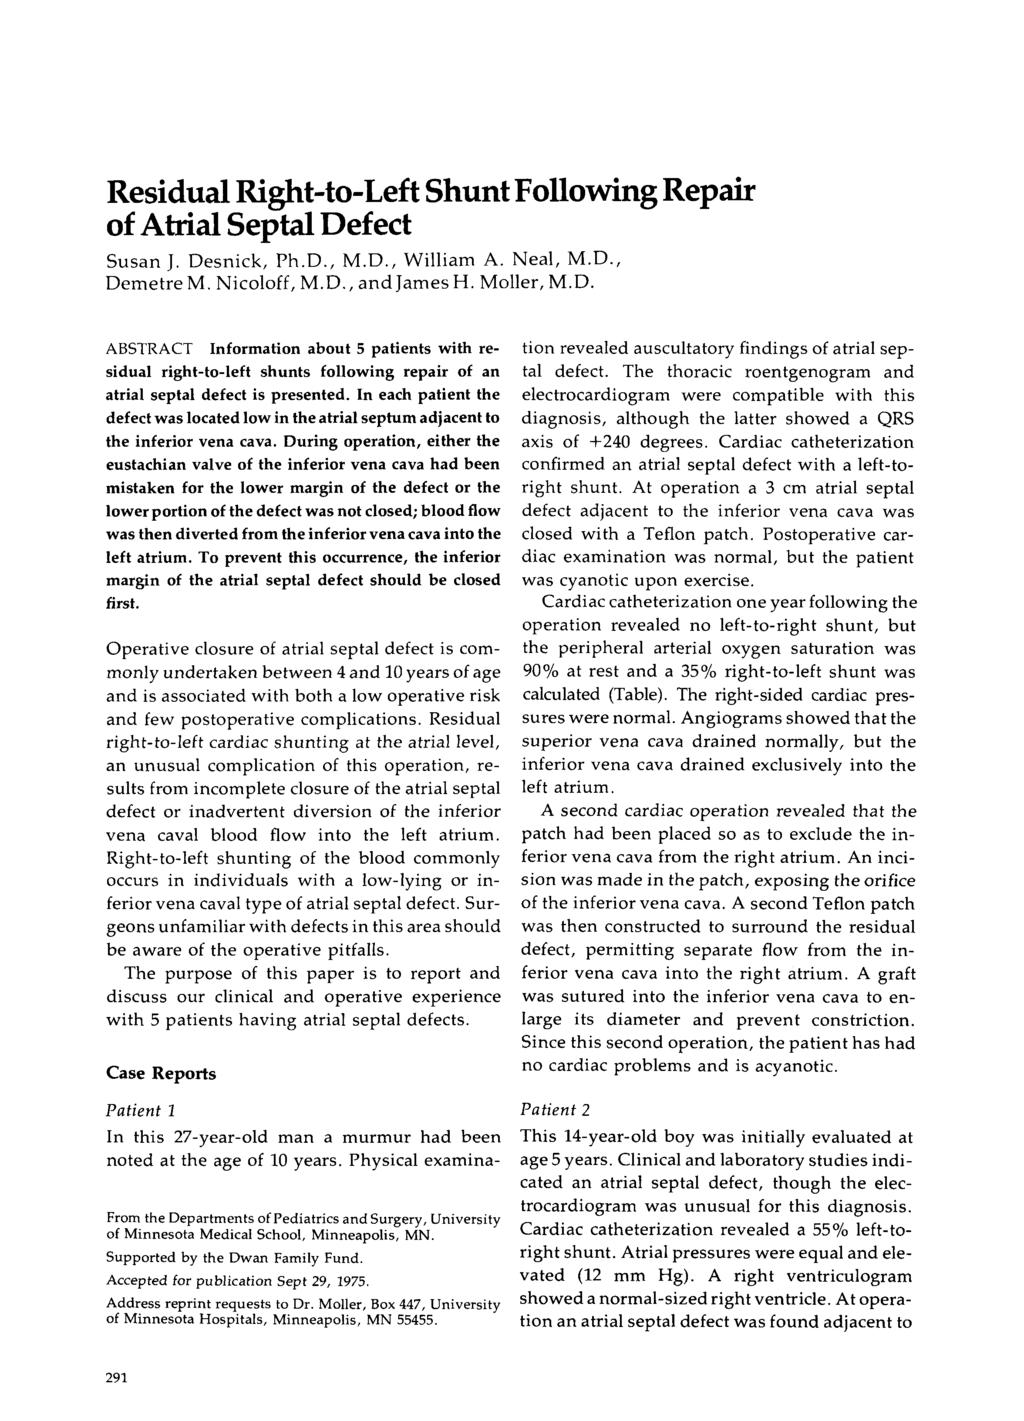 Residual Right=to-Left Shunt Following Repair of Atrial Septal Defect Susan J. Desnick, Ph.D., M.D., William A. Neal, M.D., Demetre M. Nicoloff, M.D., and James H. Moller, M.D. ABSTRACT Information about 5 patients with residual right-to-left shunts following repair of an atrial septal defect is presented.